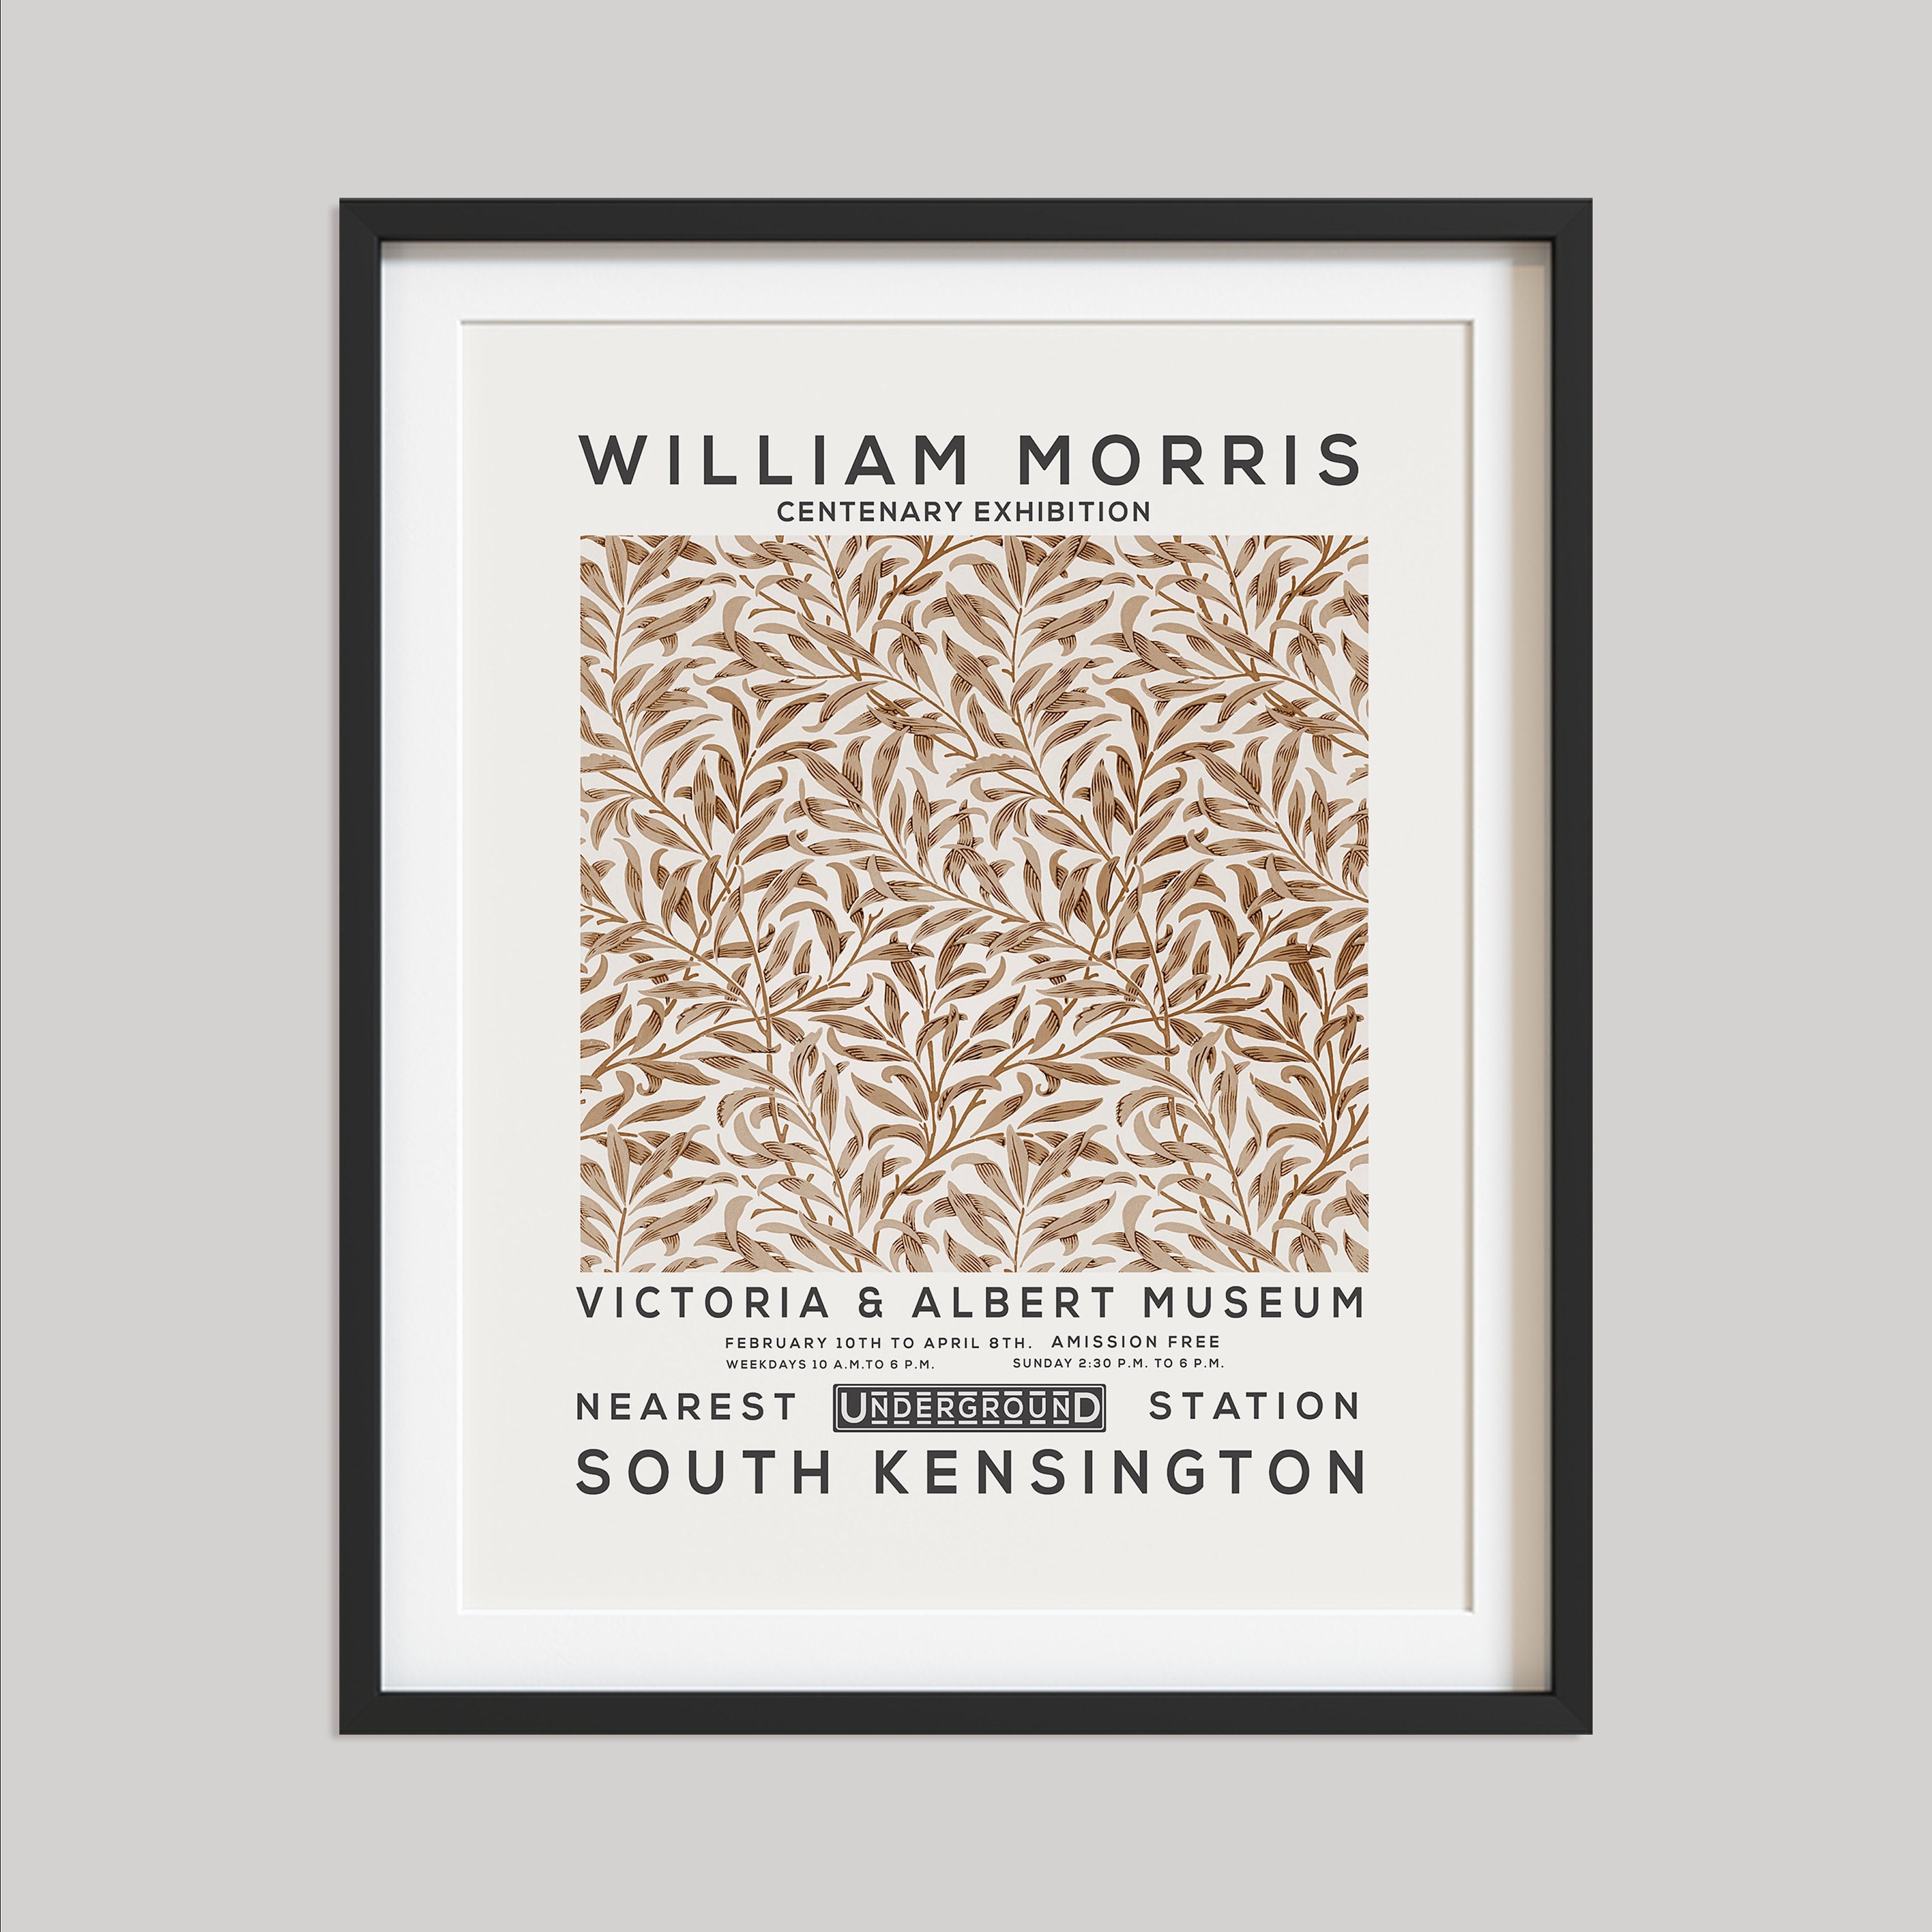 William Morris Print, Vintage Wall Decor, Exhibition Poster, Floral Wall Art, Flower Print, Home Decor, Golden Willow